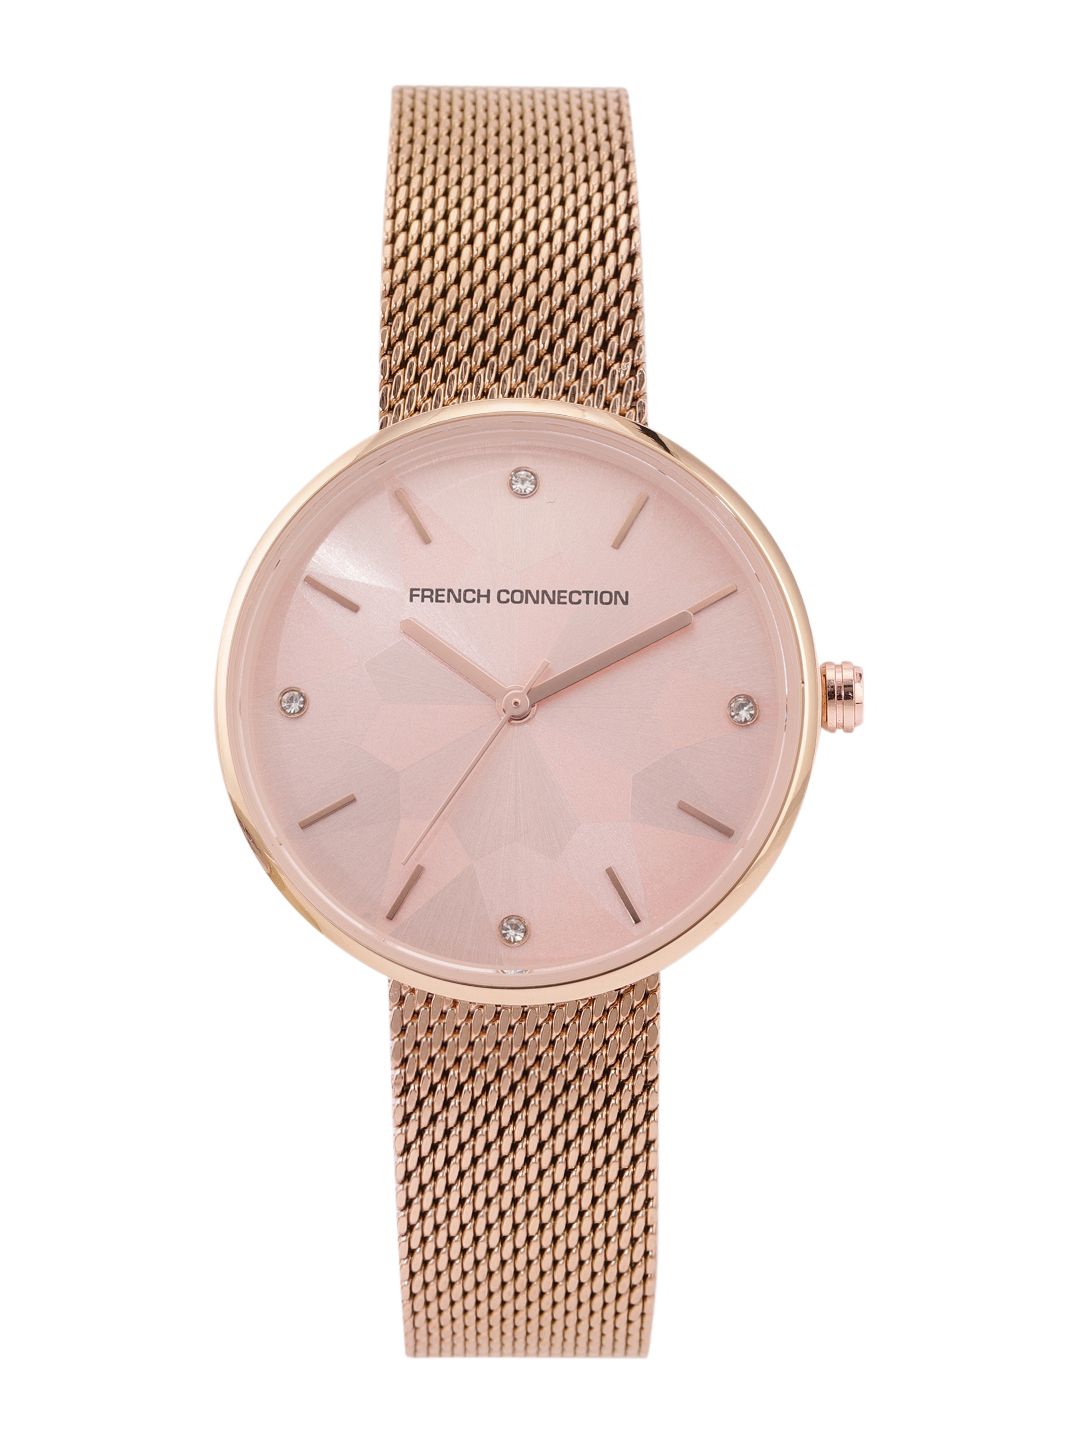 French Connection Women Pink Patterned Analogue Watch FCN00015B Price in India